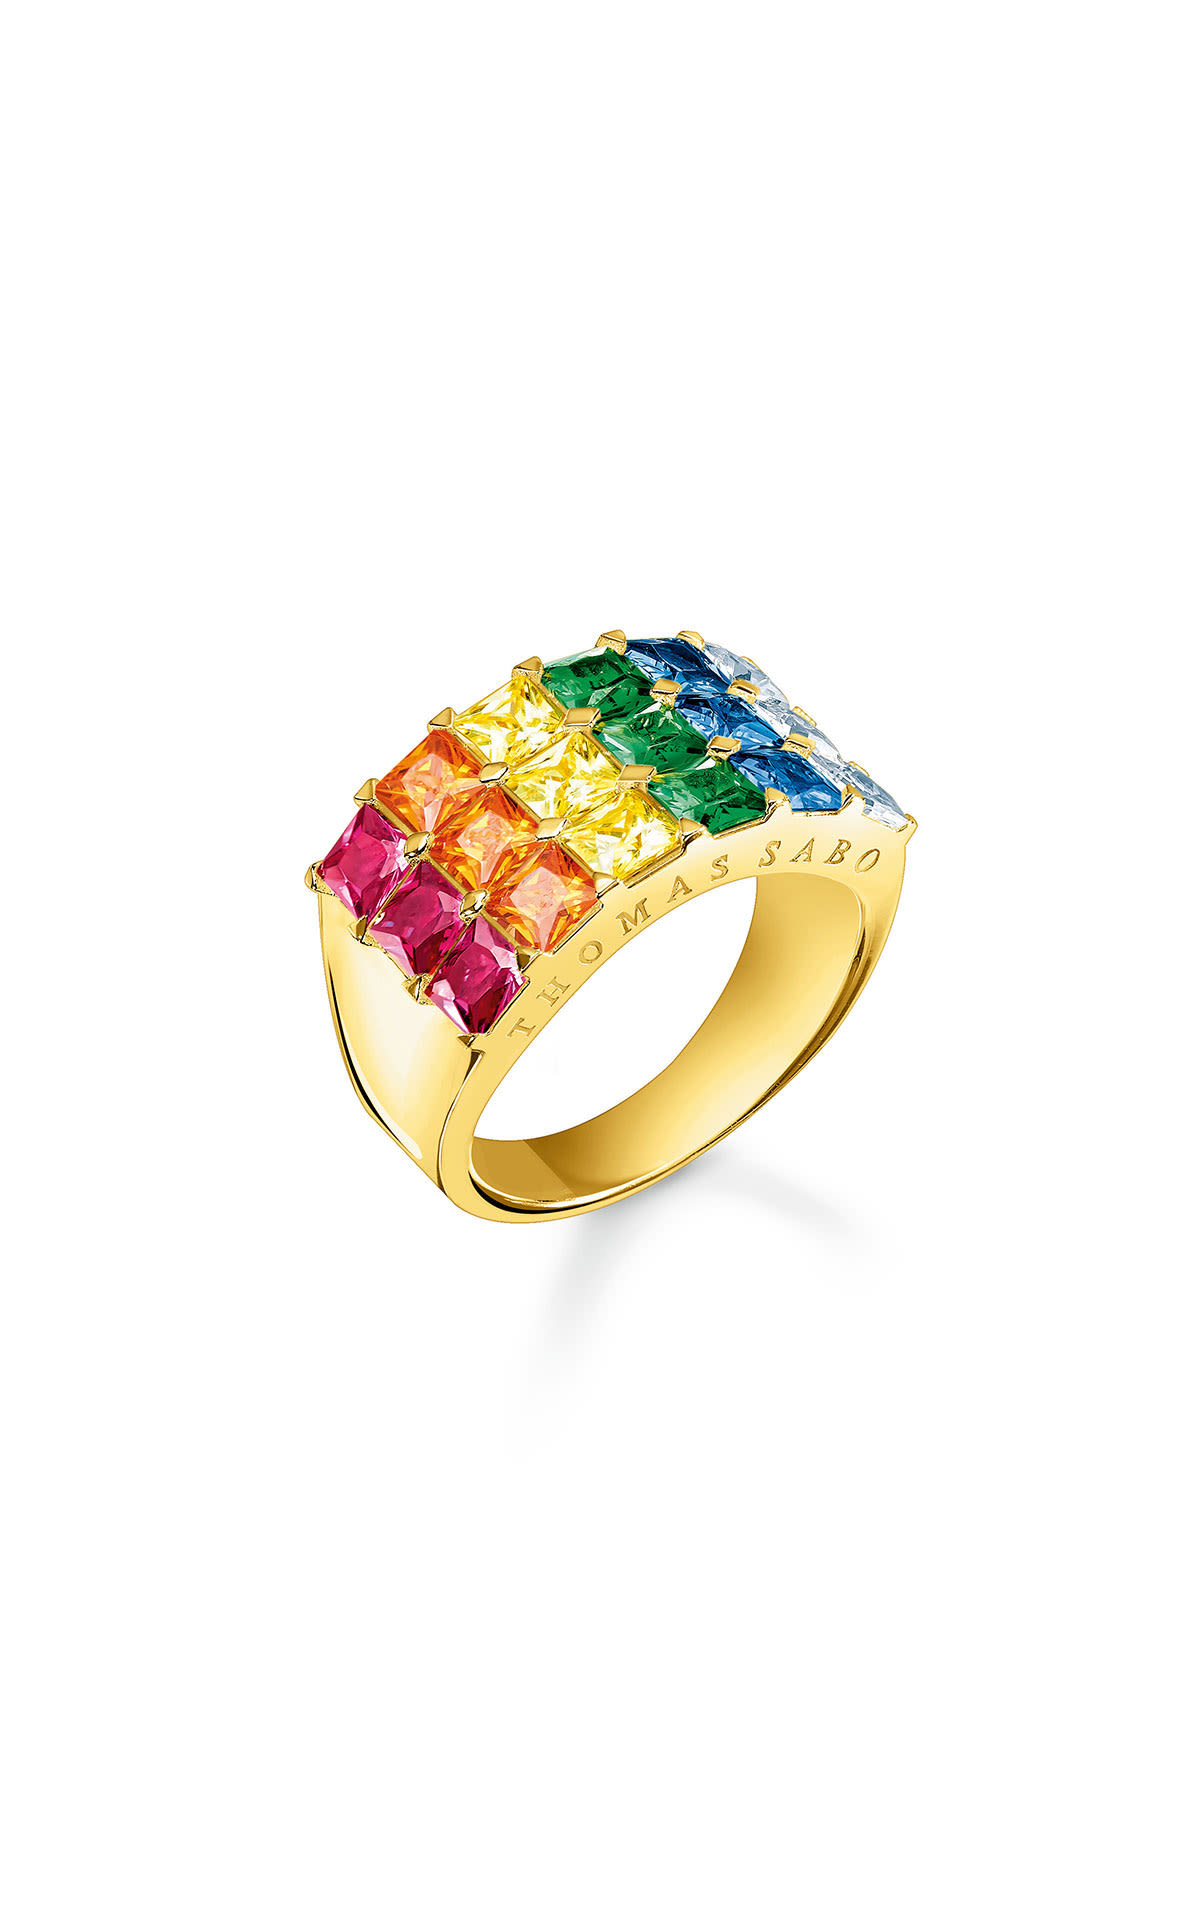 Gold ring with colored diamonds Thomas sabo